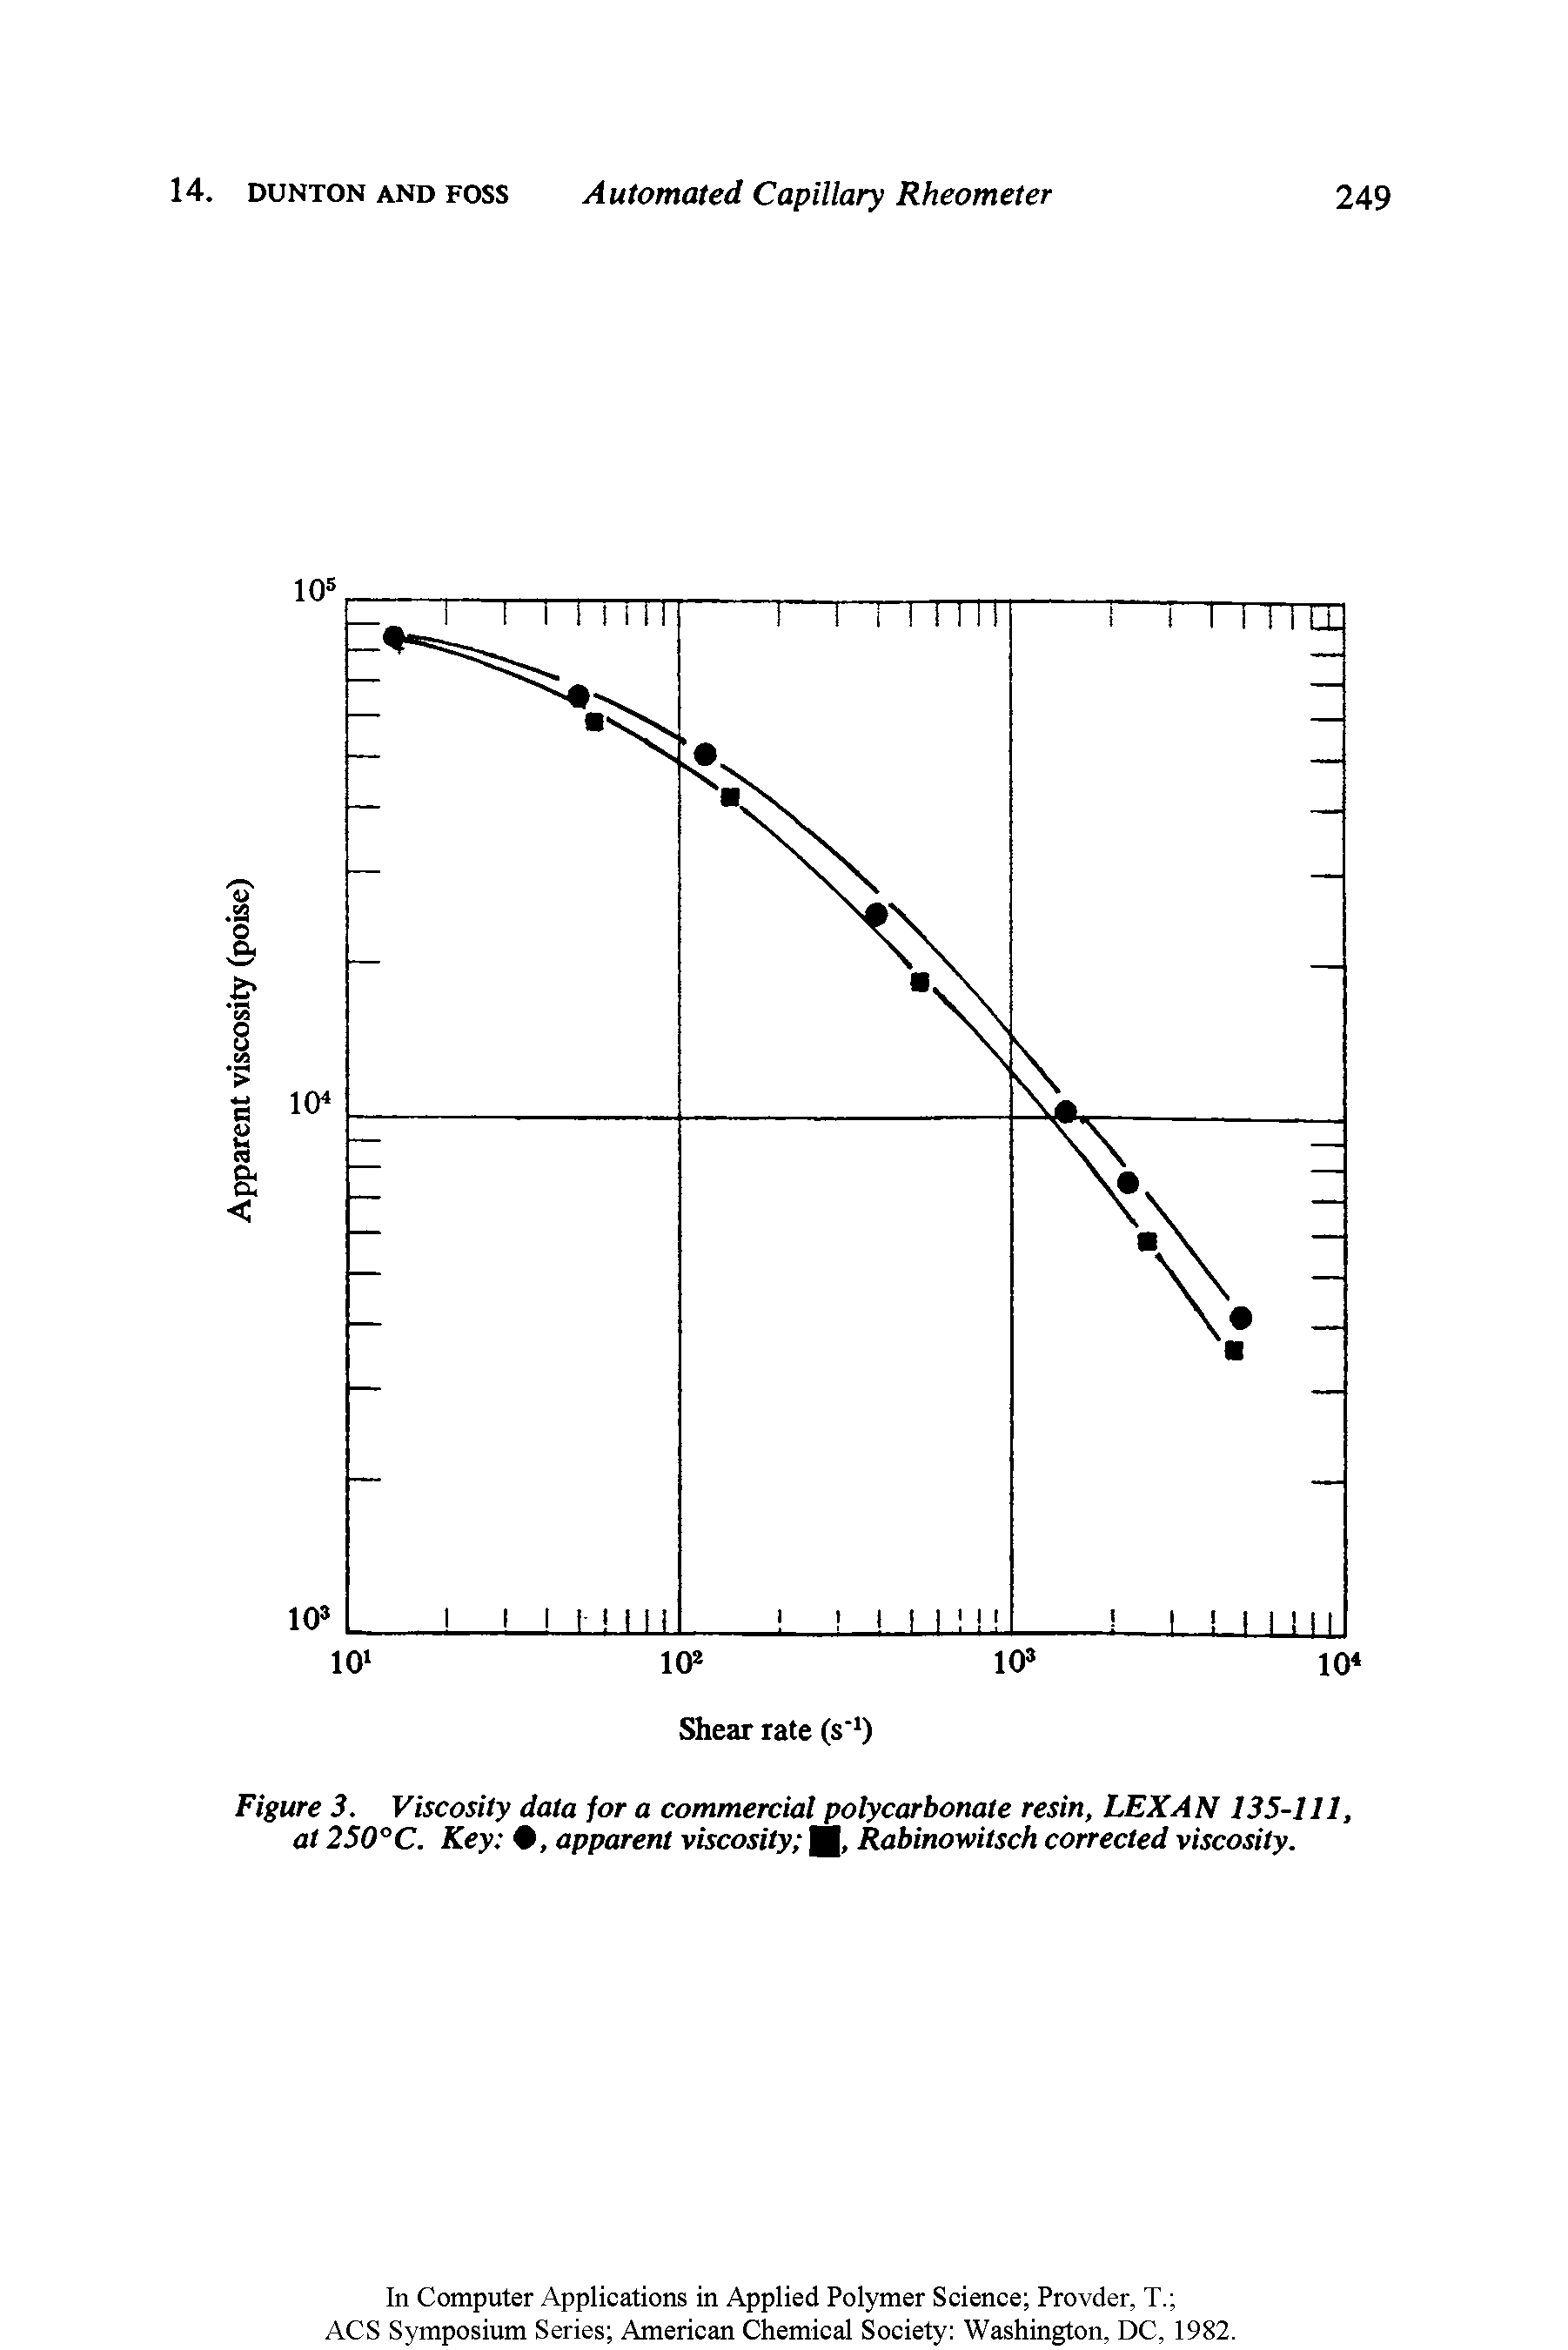 Figure 3. Viscosity data for a commercial polycarbonate resin, LEXAN 135-111, at 250°C. Key , apparent viscosity Rabinowitsch corrected viscosity.